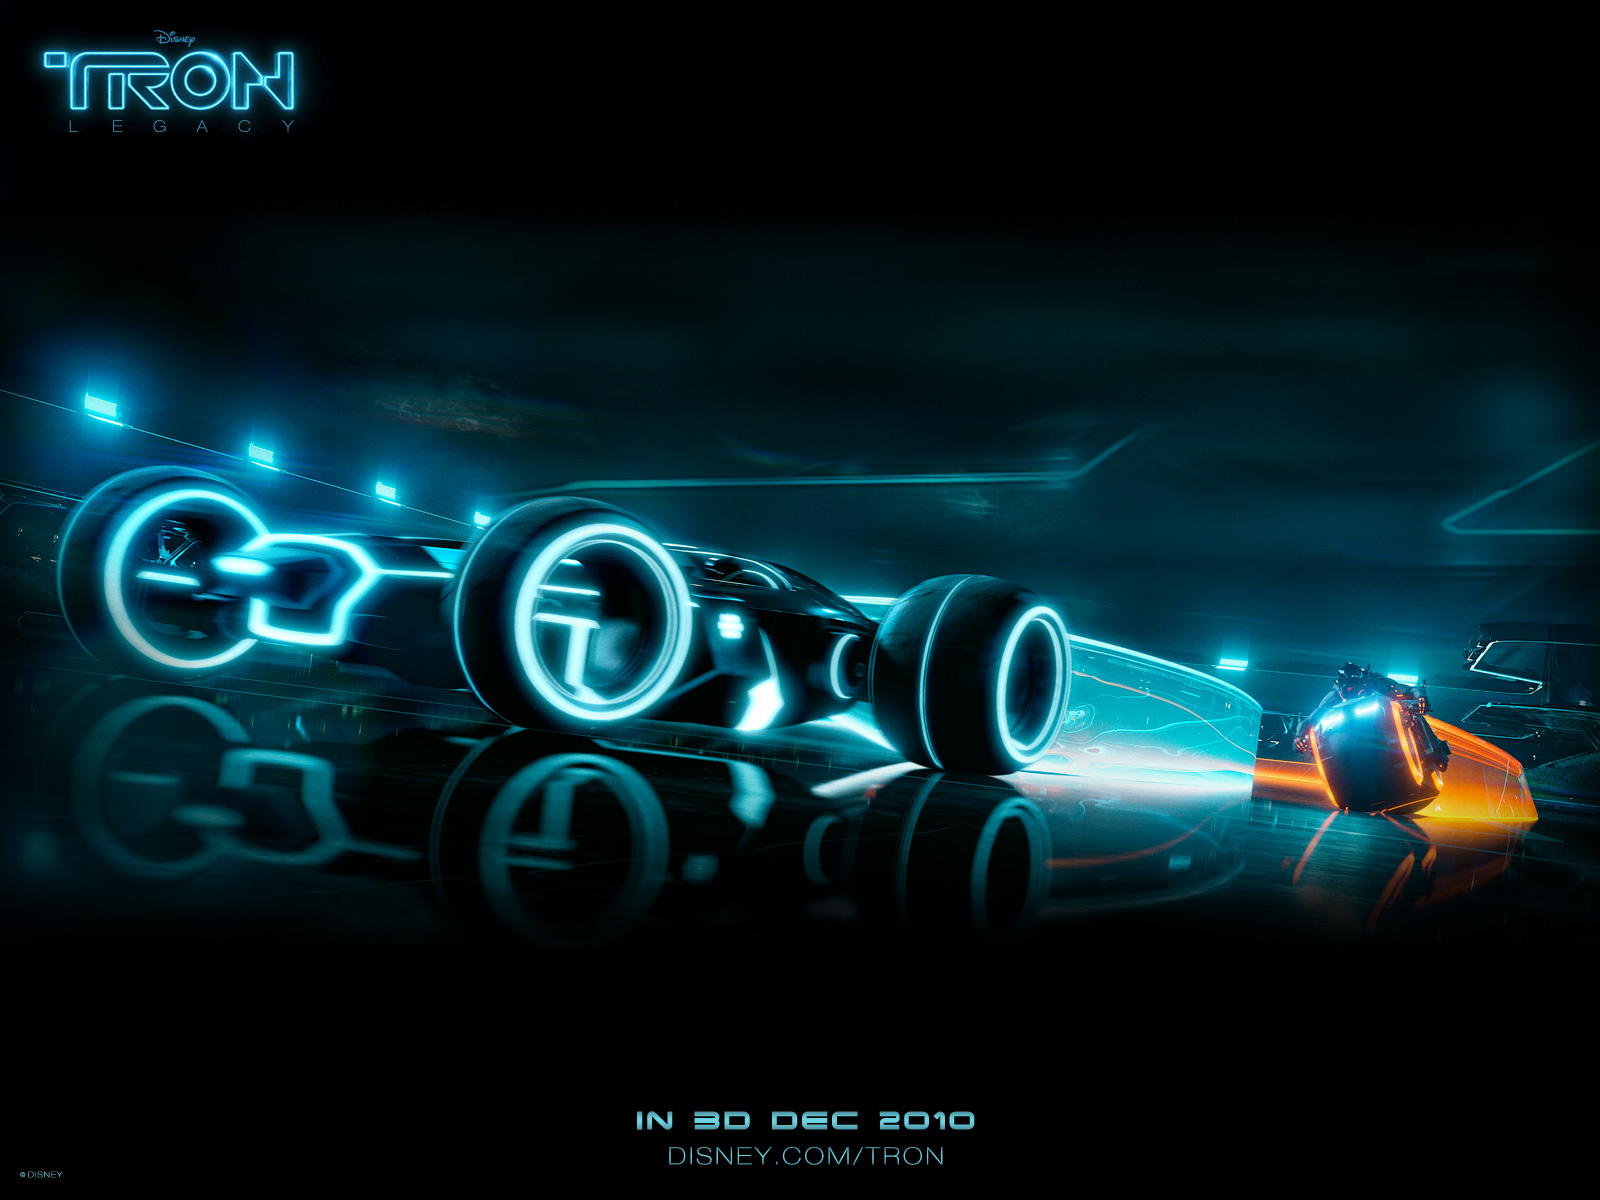  cycle and car race scene from Disneys Tron Legacy movie wallpaper